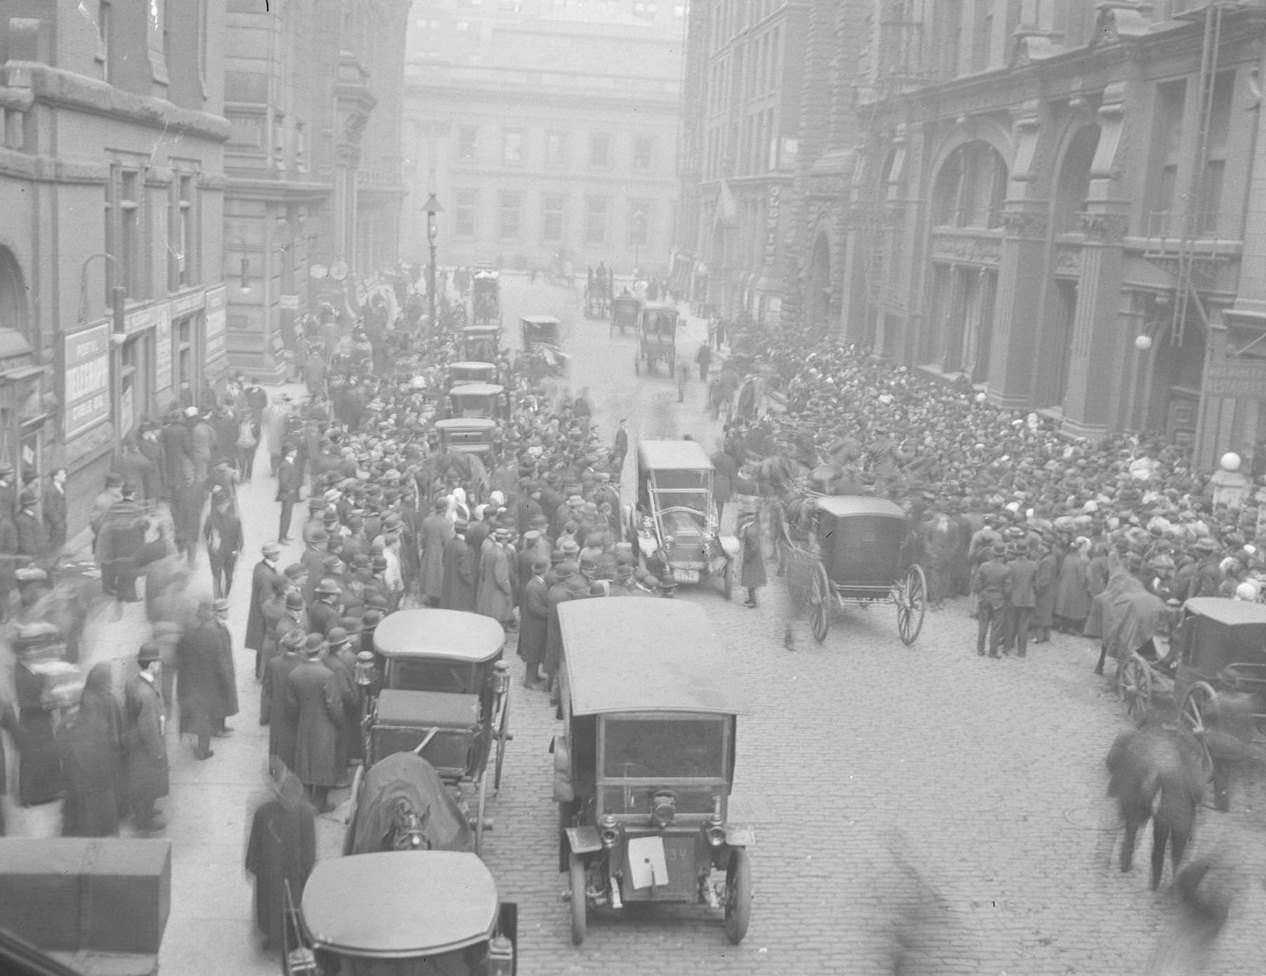 Crowd of people gathered for the garment workers' strike on Lasalle Street, north from Van Buren Street, Chicago, Illinois, 1910s.